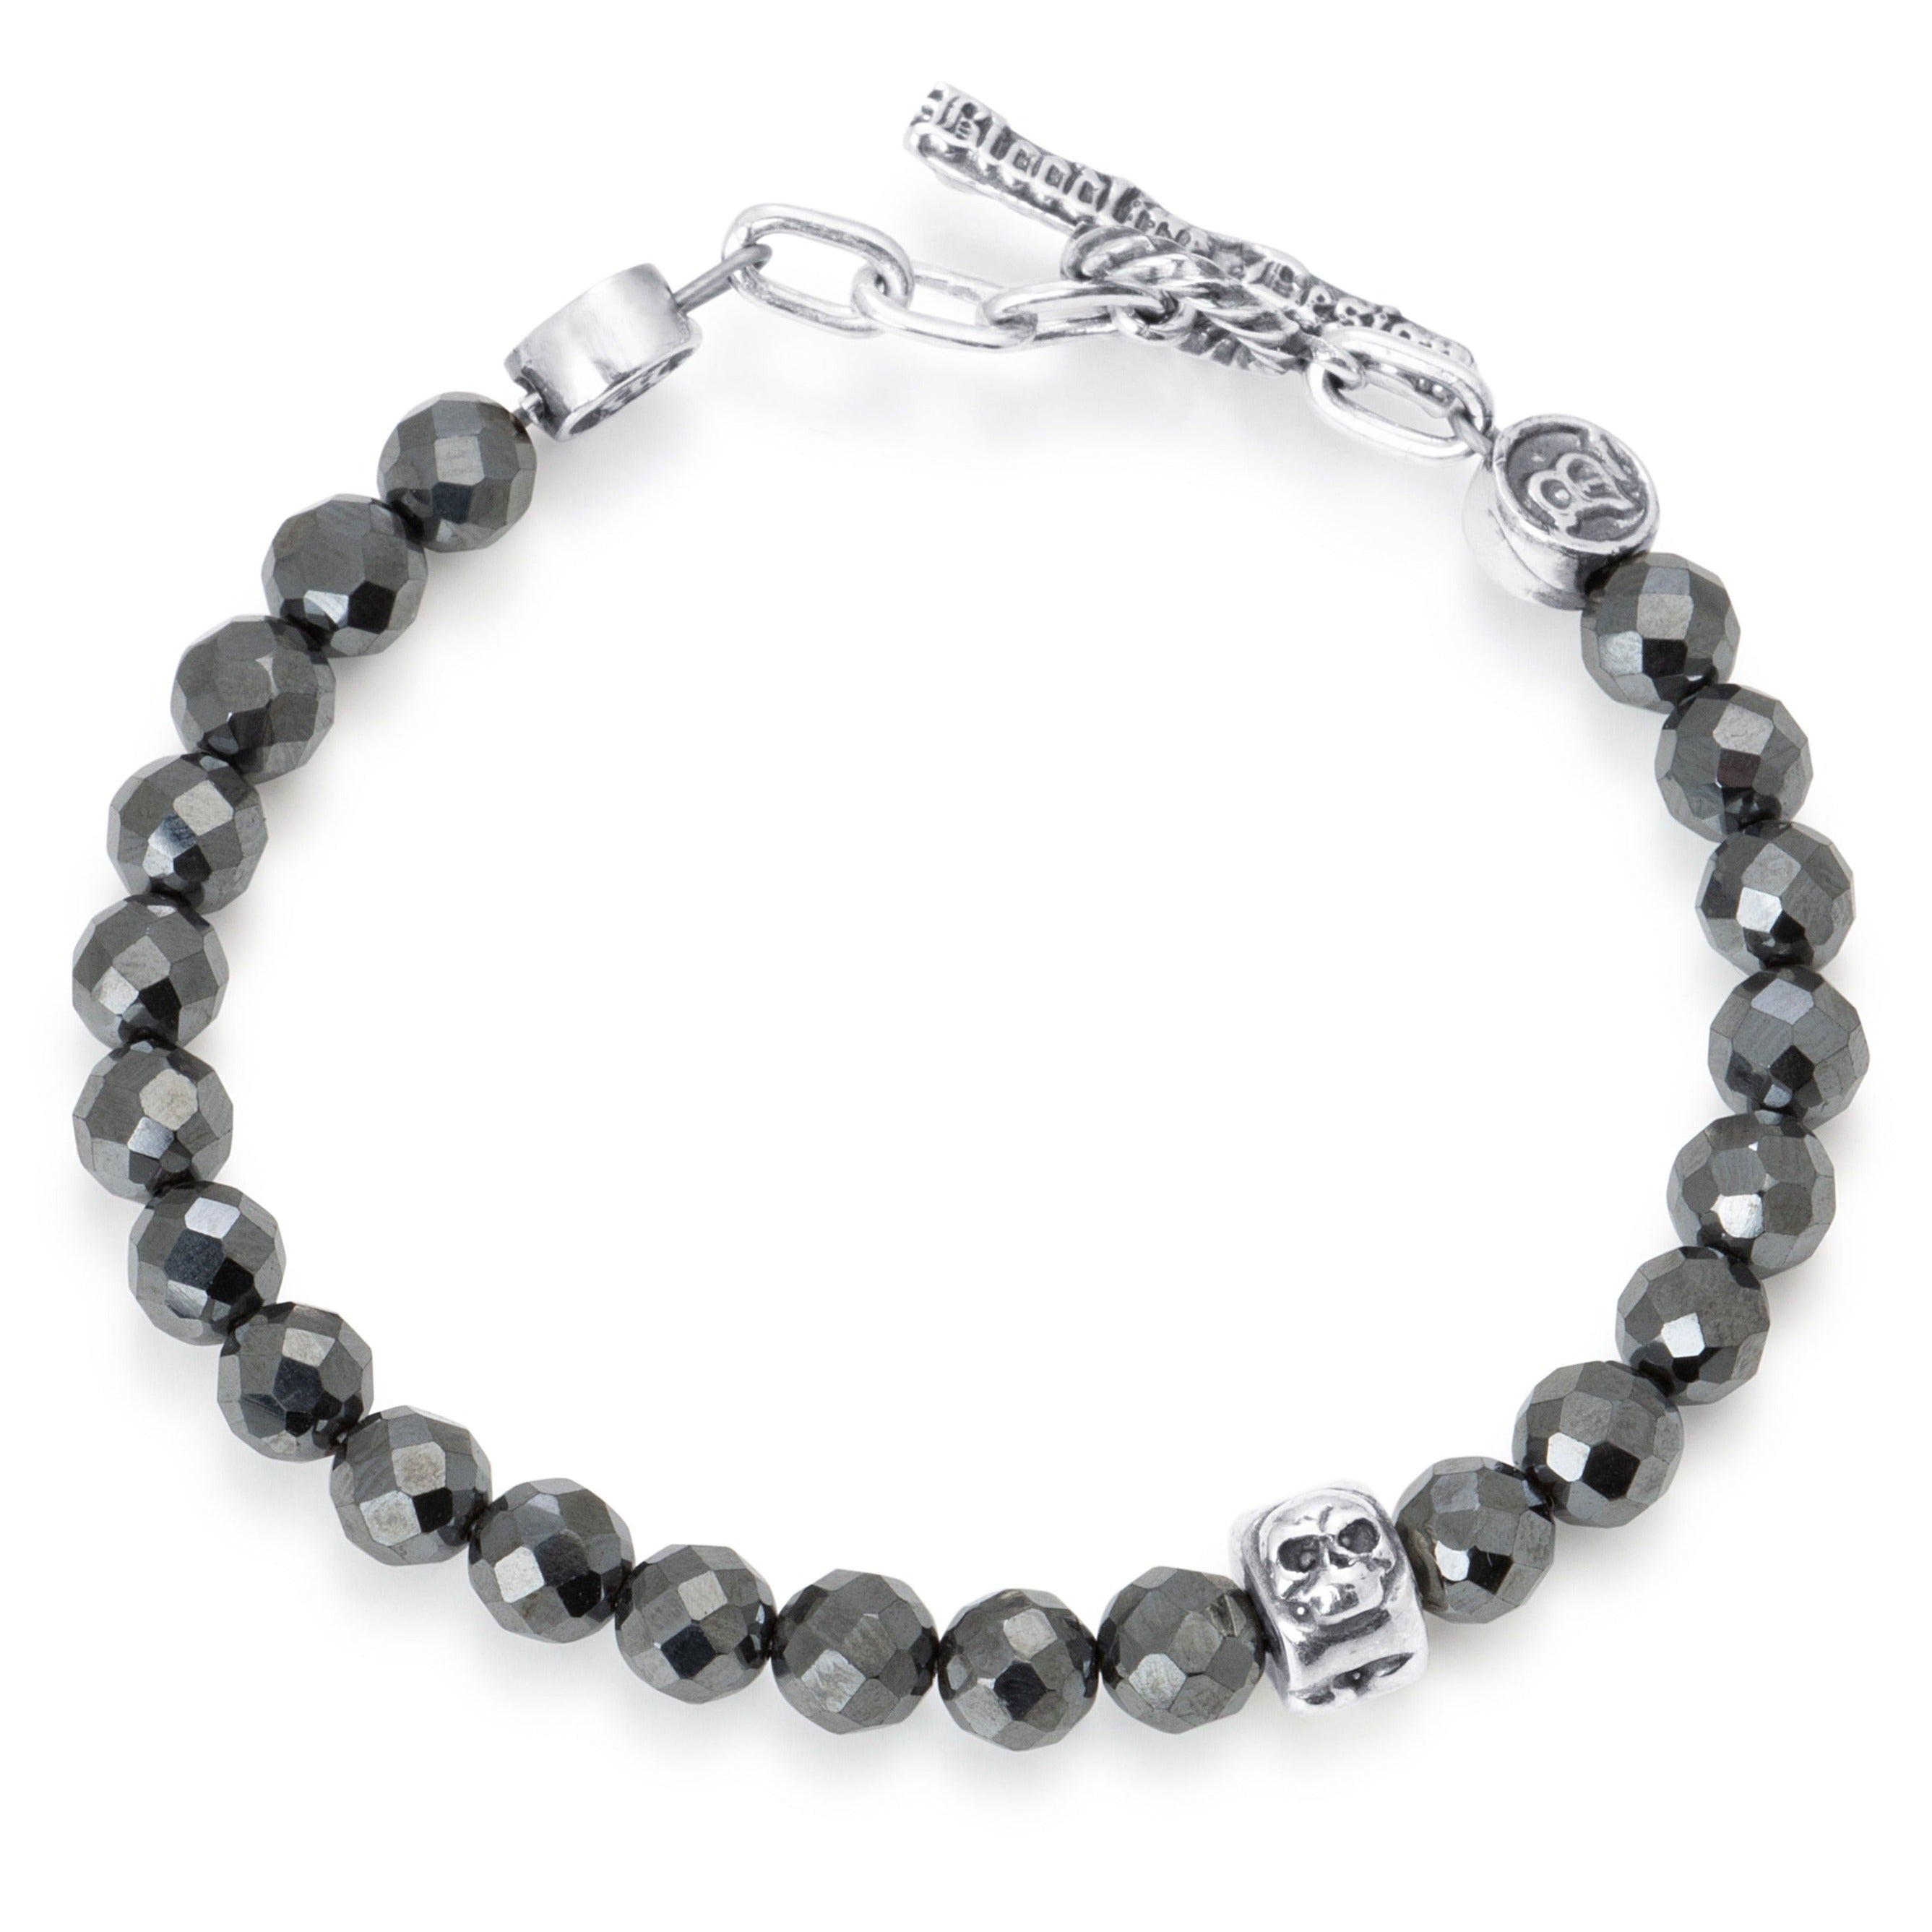 Facetted Hematite beads paired with a single sterling silver bead engraved with a heart star and skull on a stainless steel cable with Sterling silver T clasp.